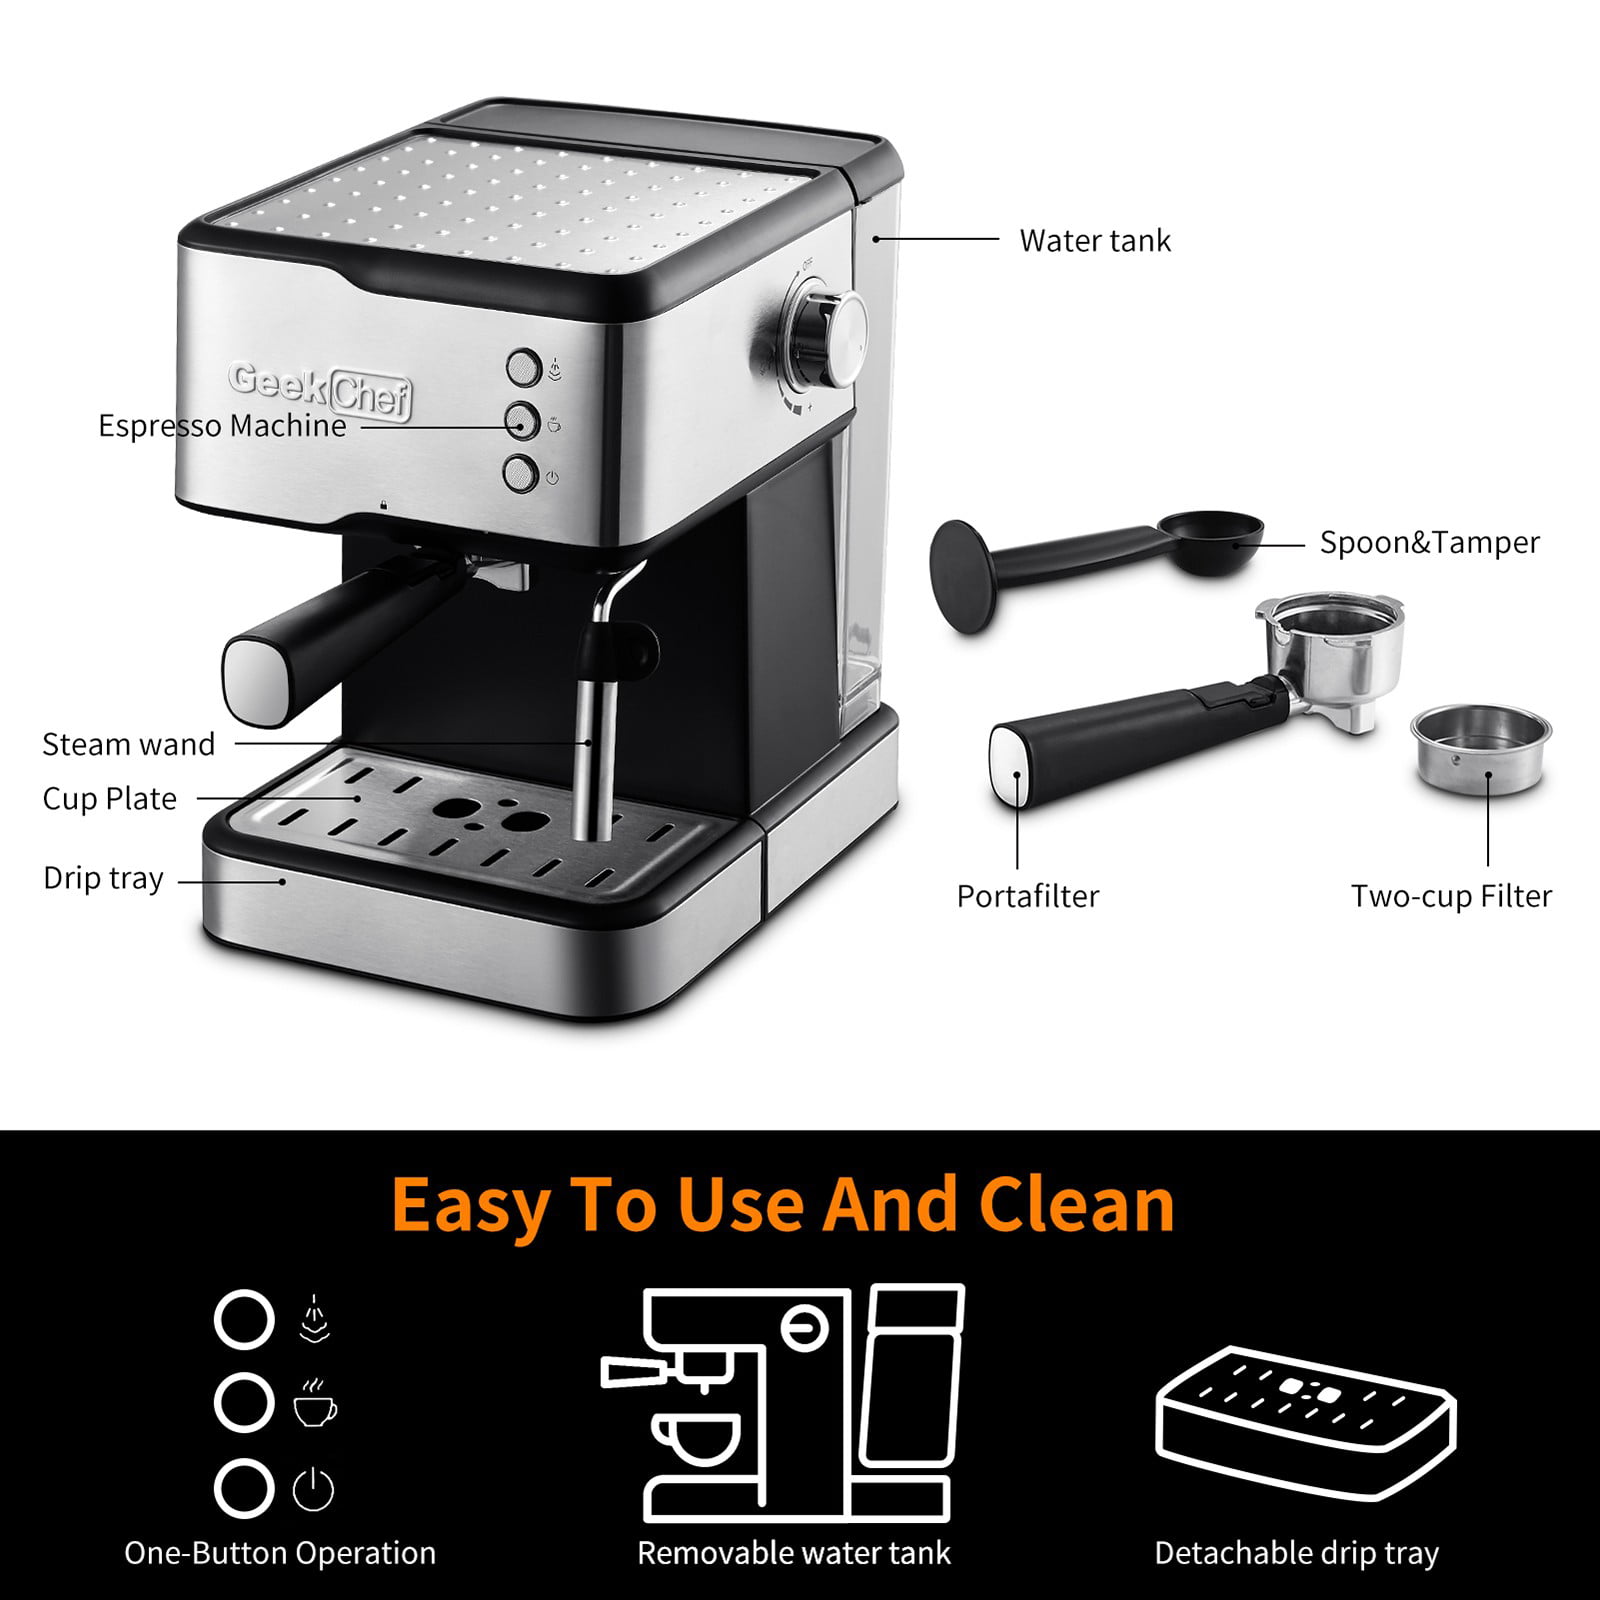 Elexnux 1350-Watt 2-Cup Black Espresso Machine 20-Bar Compact Coffee Maker with Milk Frother Steam Wand and 1.4 L Water Tank